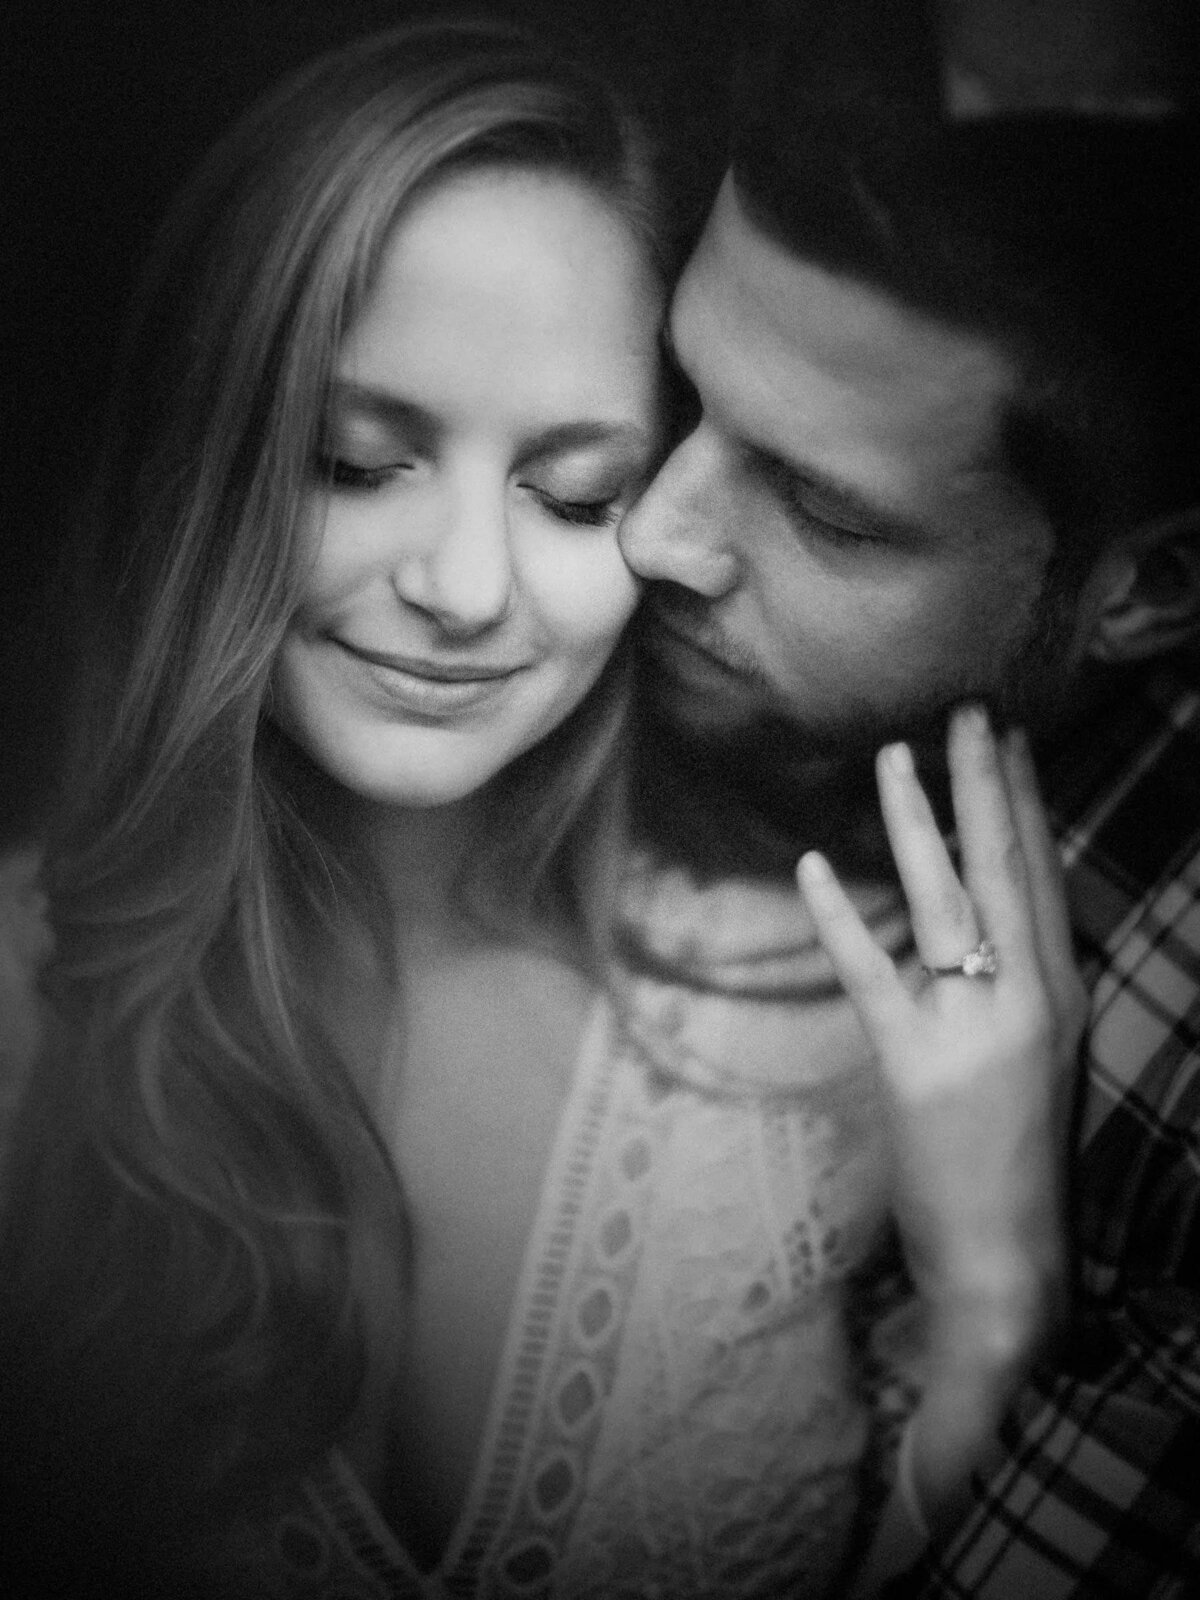 Intimate black and white portrait of a couple close together, with the woman showcasing an engagement ring